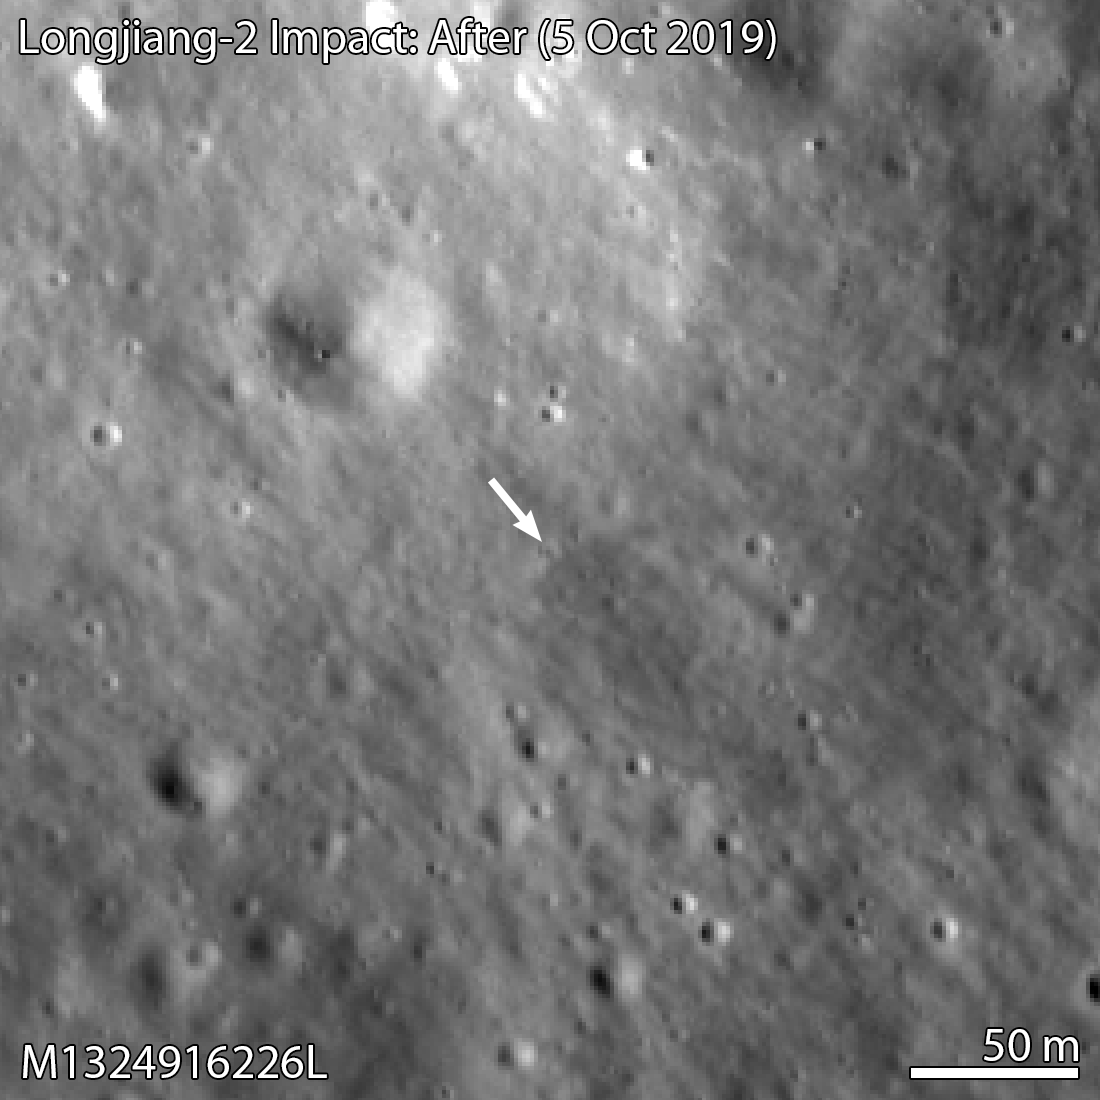 LROC NAC image of new crater, likely from Longjiang 2 impact